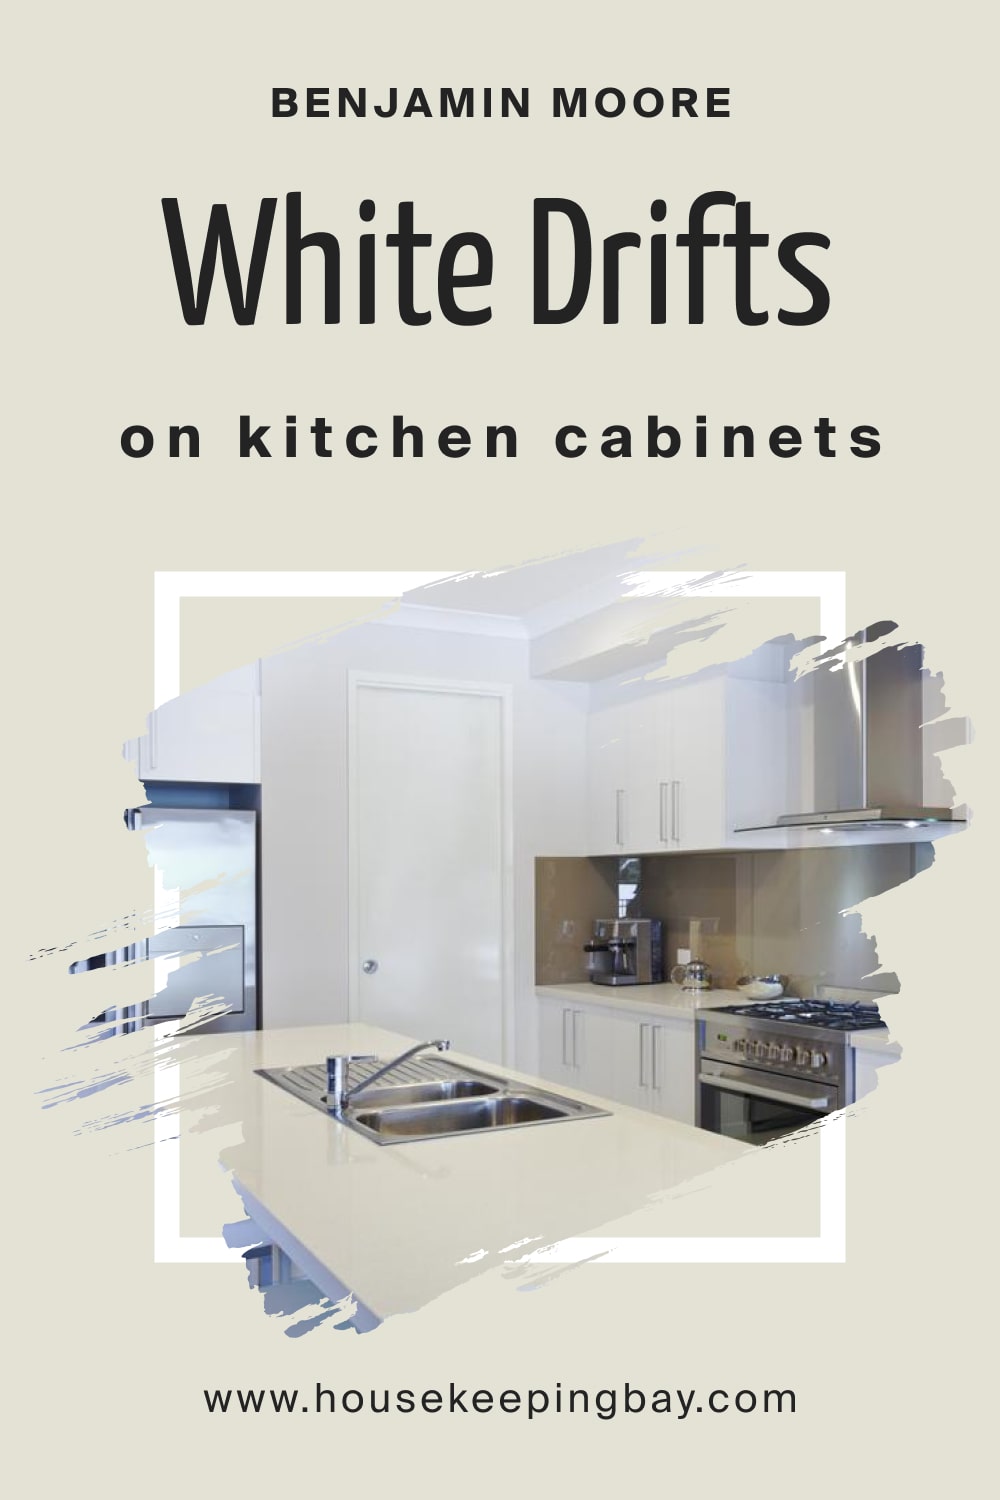 Benjamin Moore. White Drifts OC 138 On Kitchen Cabinets